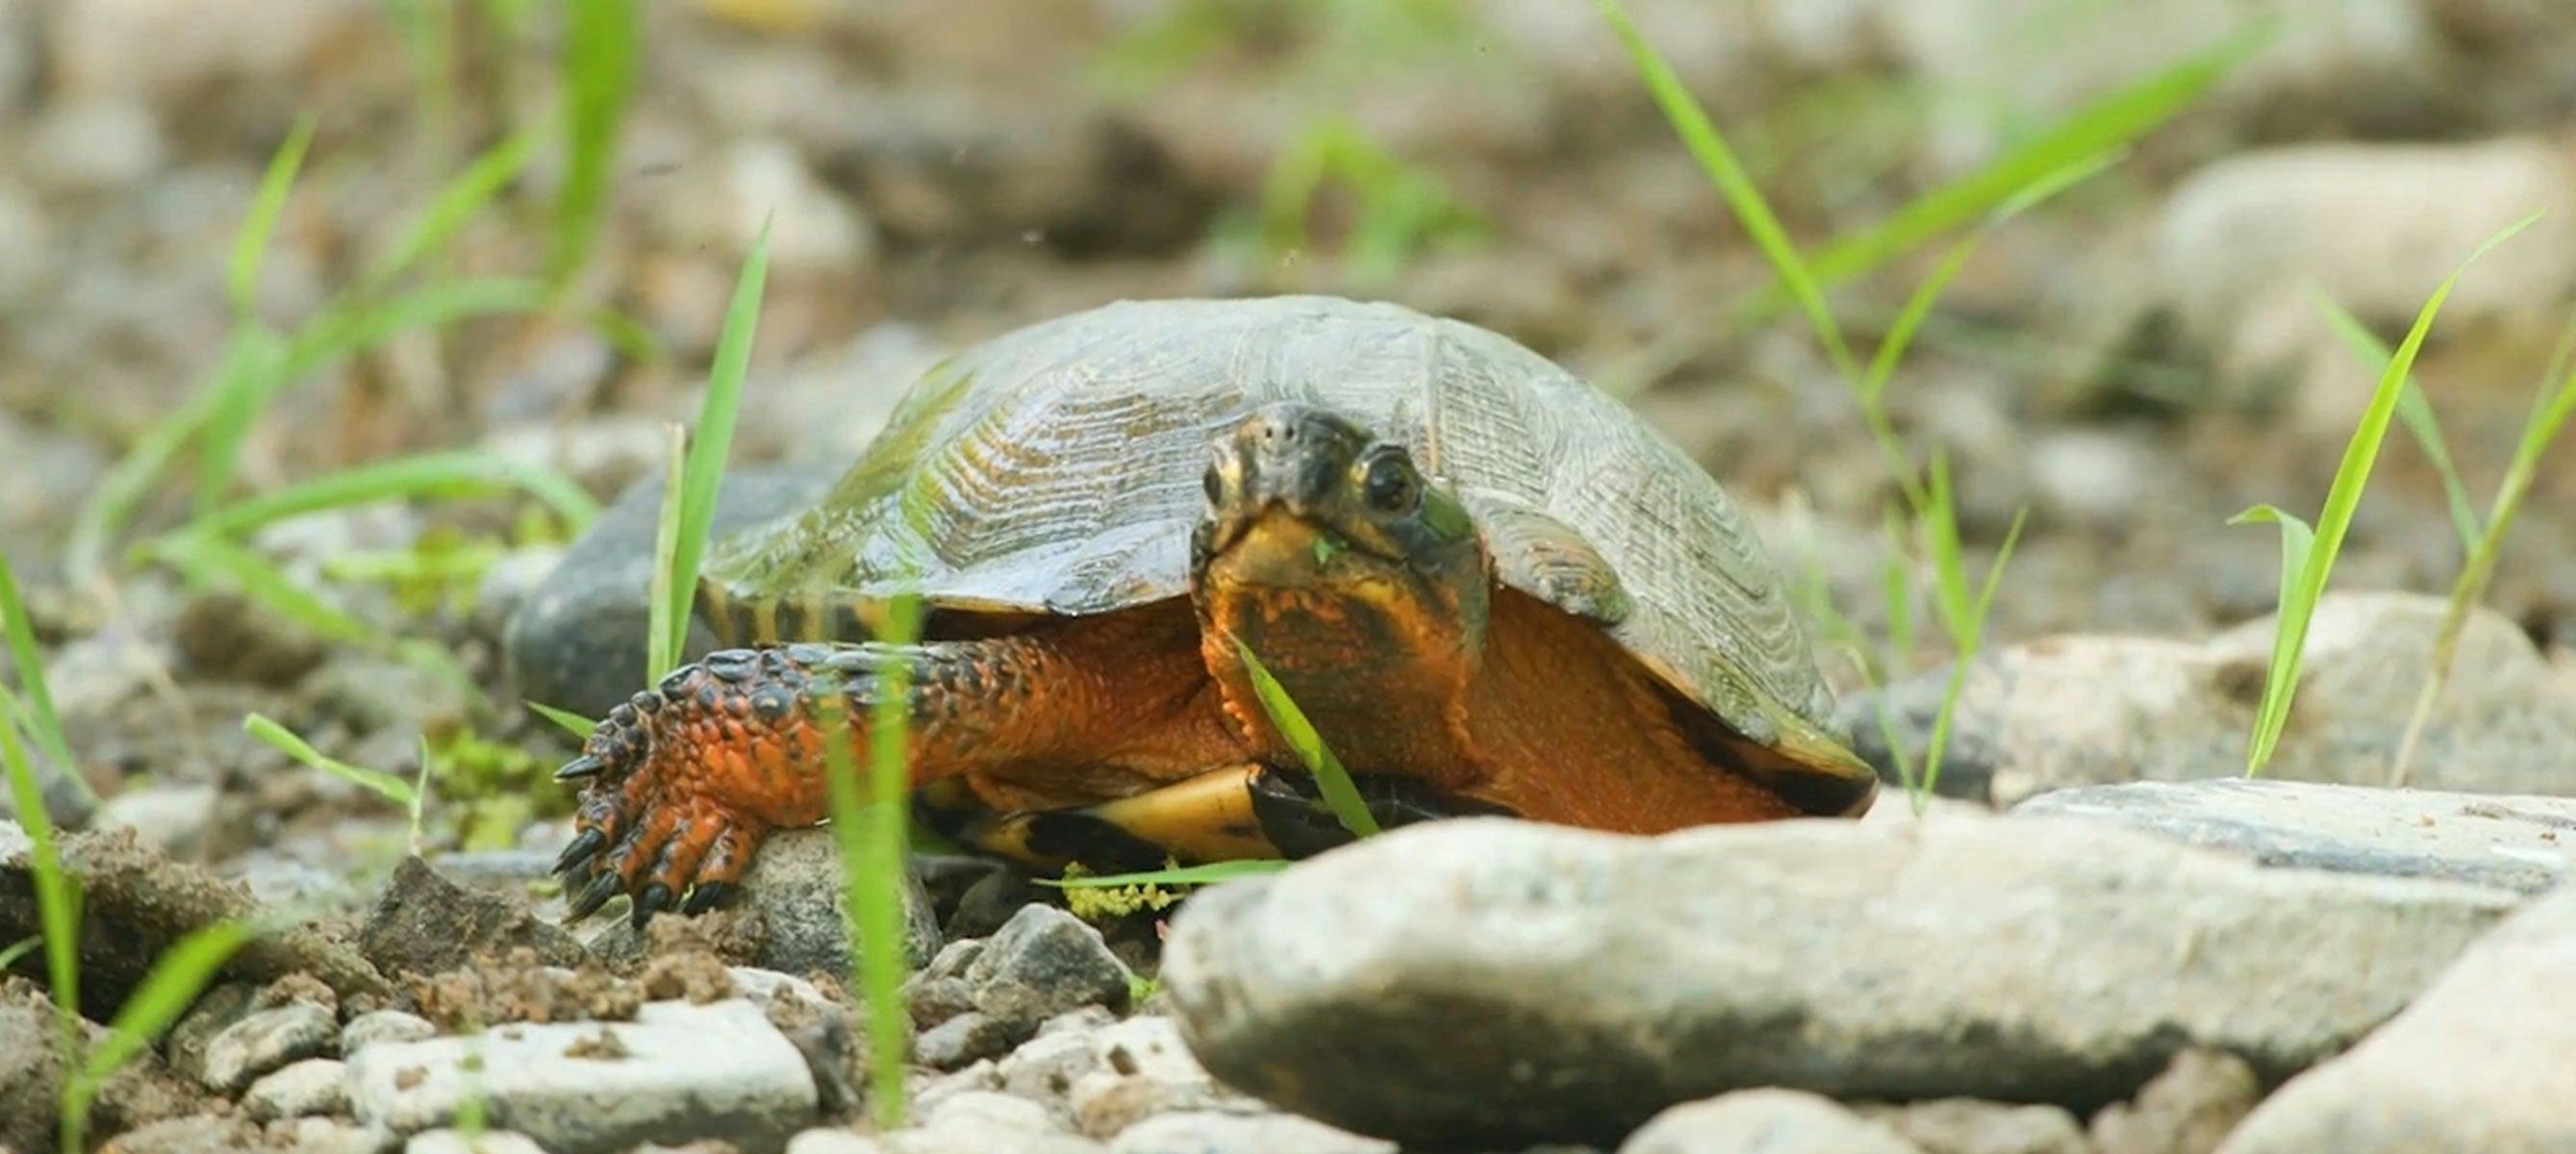 The endangered North American Wood Turtle.